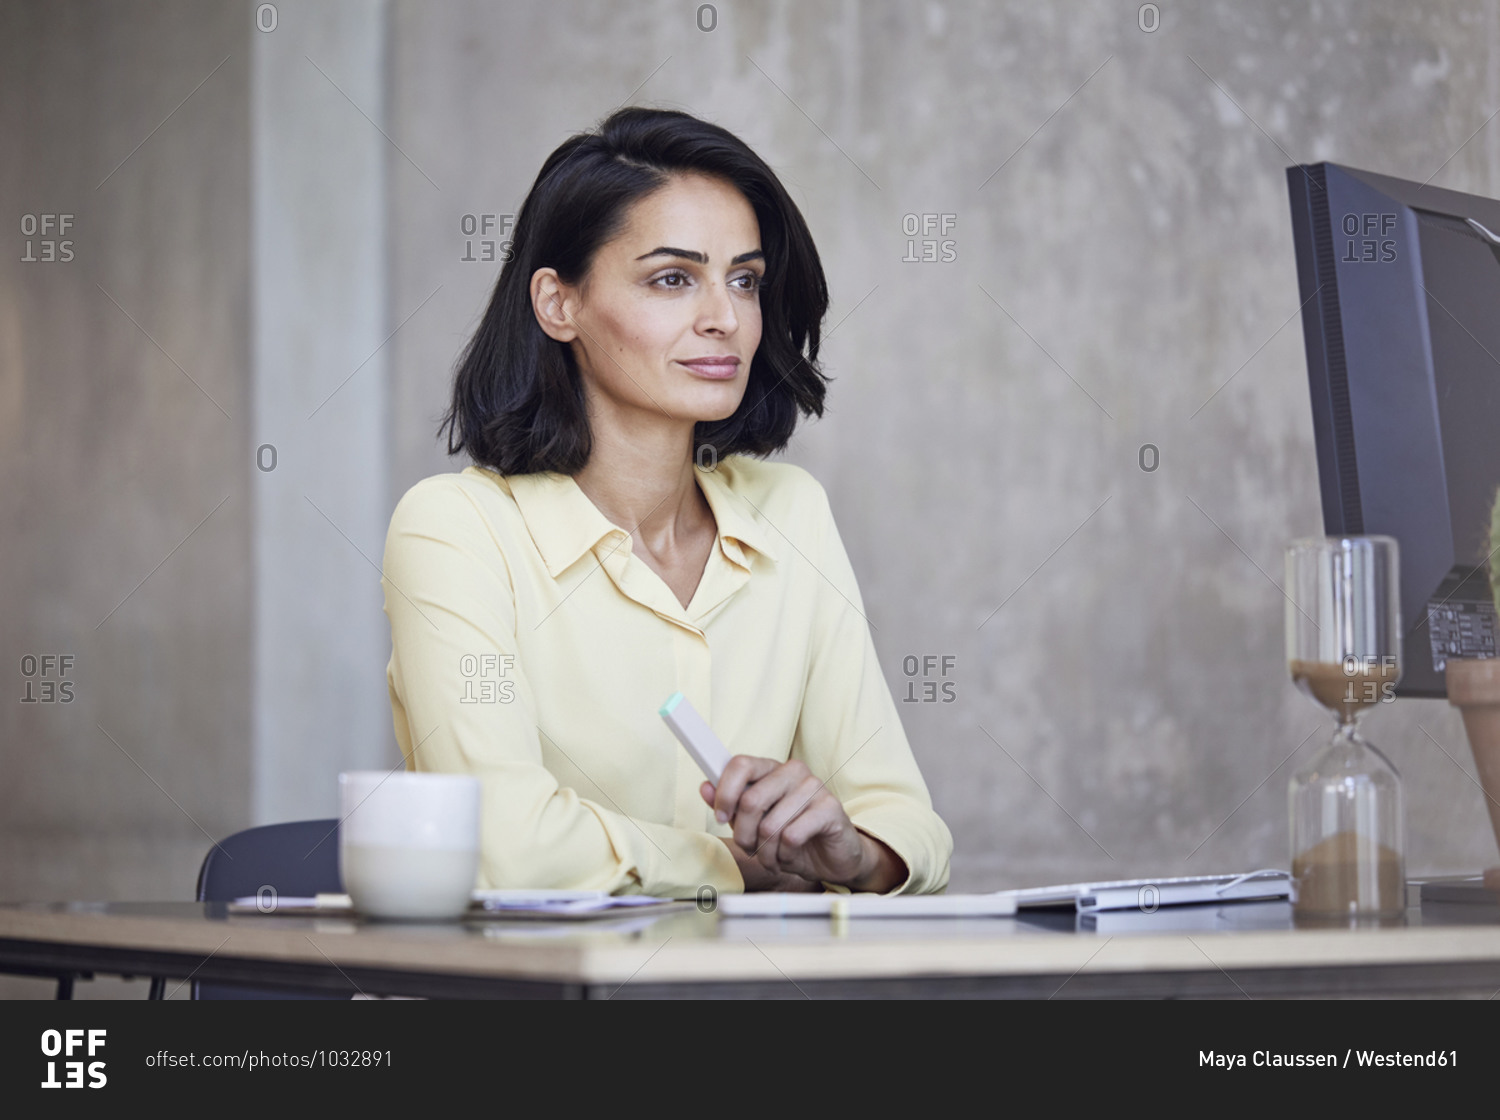 Thoughtful female entrepreneur looking away while sitting at desk against wall in office